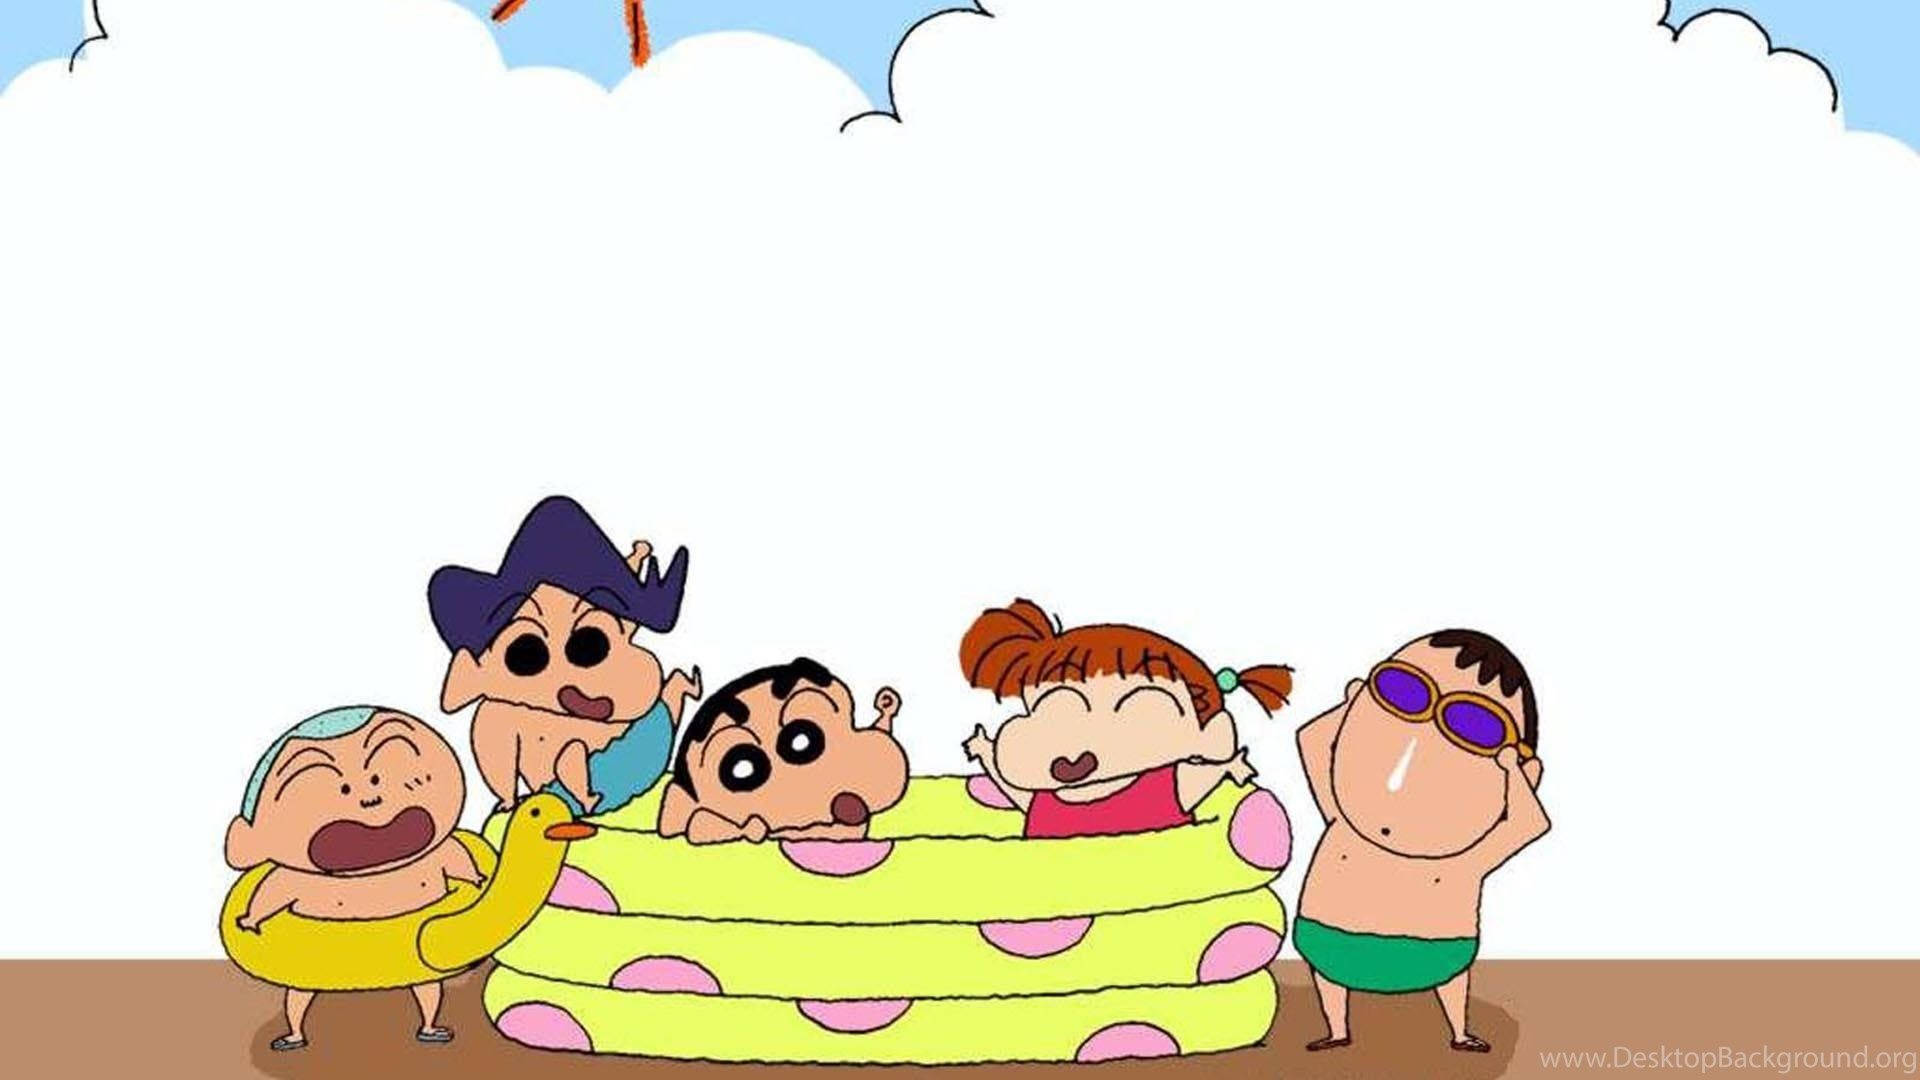 Crayon Shin Chan Characters In Pool Background